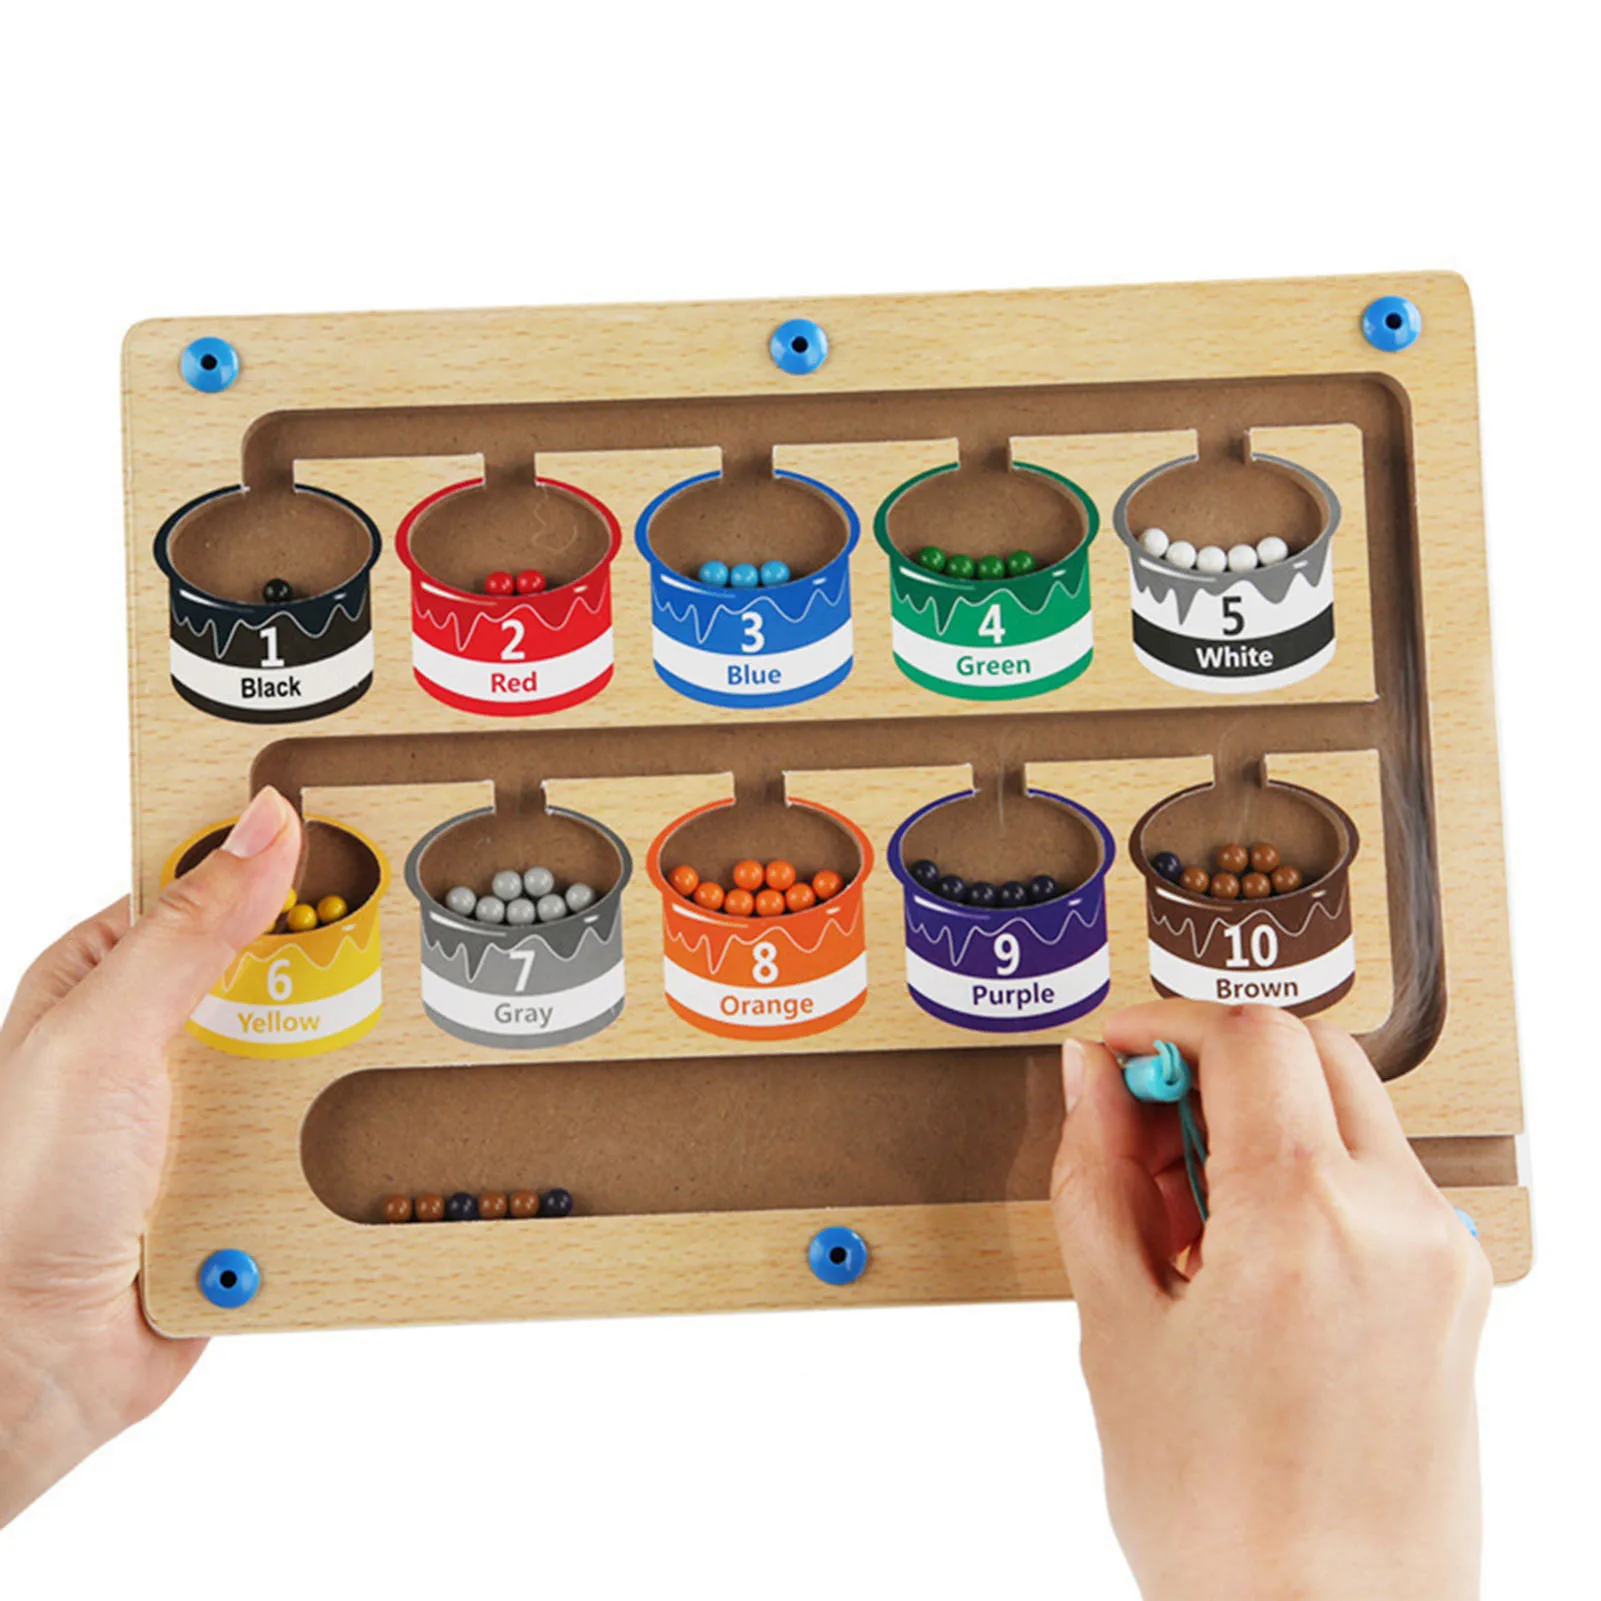 

Wooden Magnetic Counting Operation Toys Creative Intelligence Logic Training Blocks Toy for Children Early Educational Toys